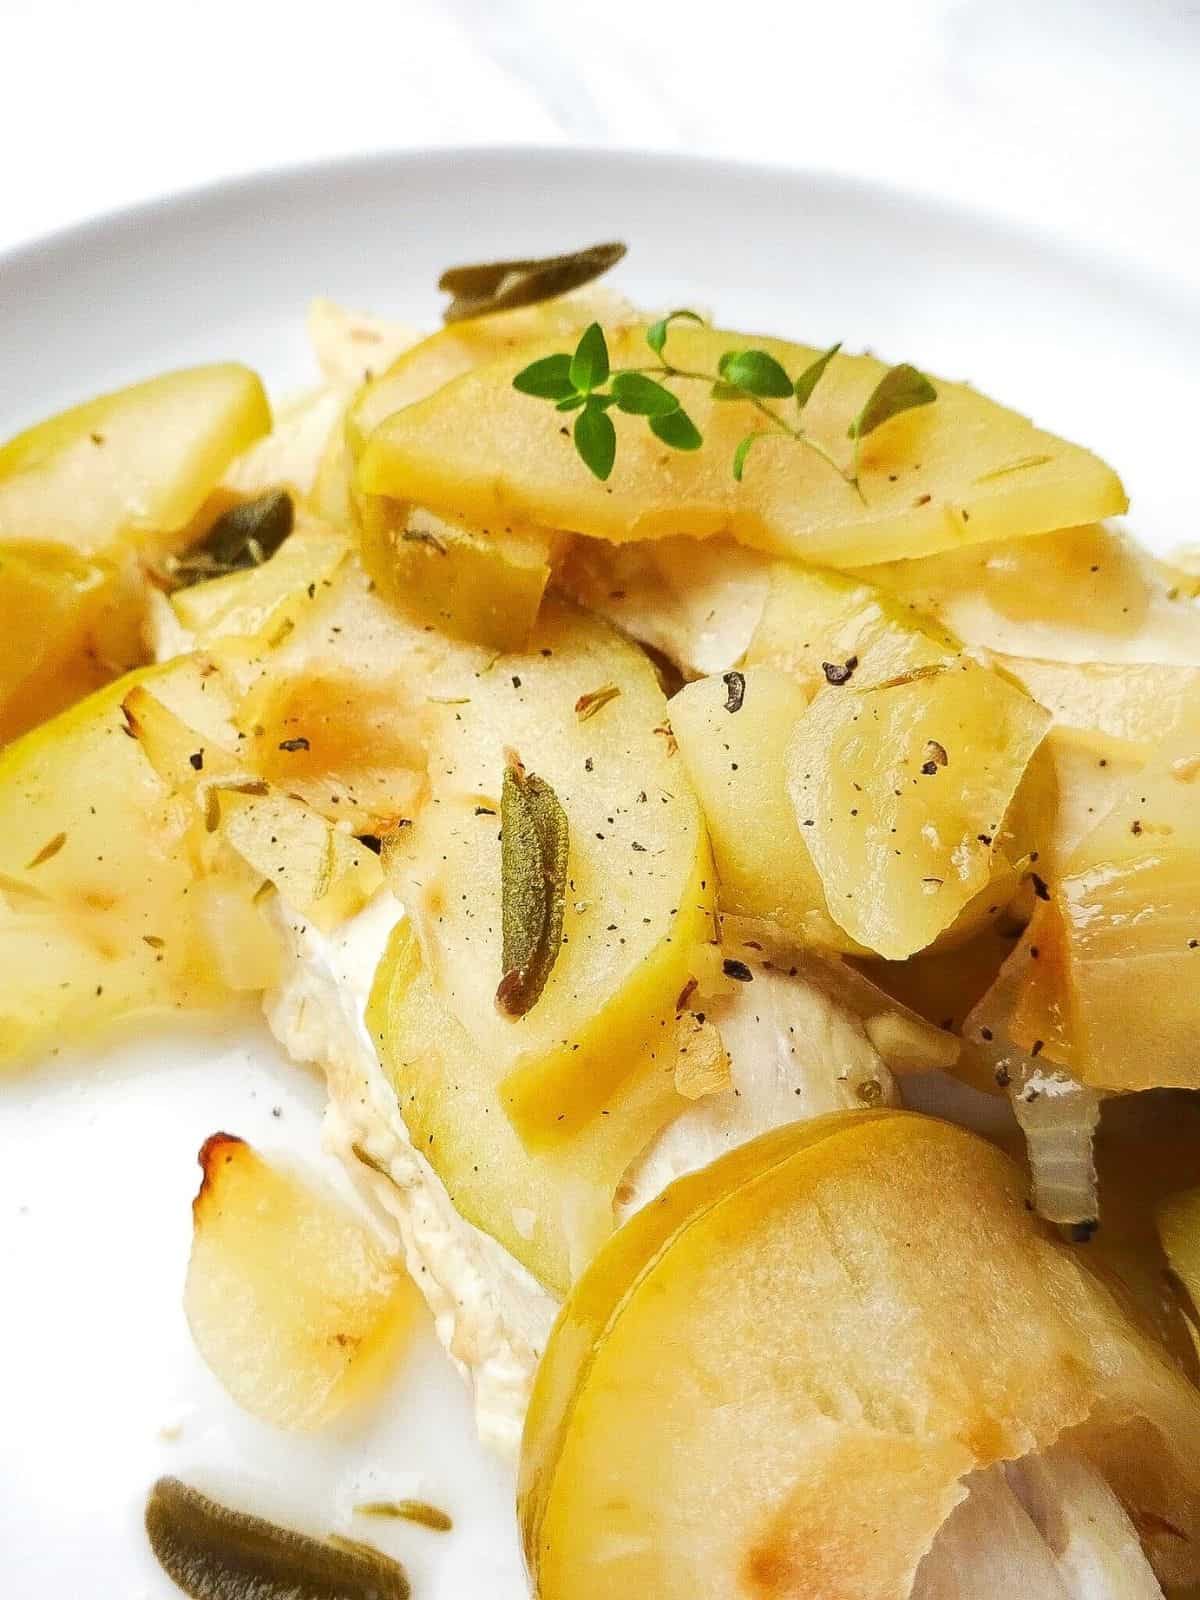 baked chicken with apples and honey on a white plate garnished with herbs